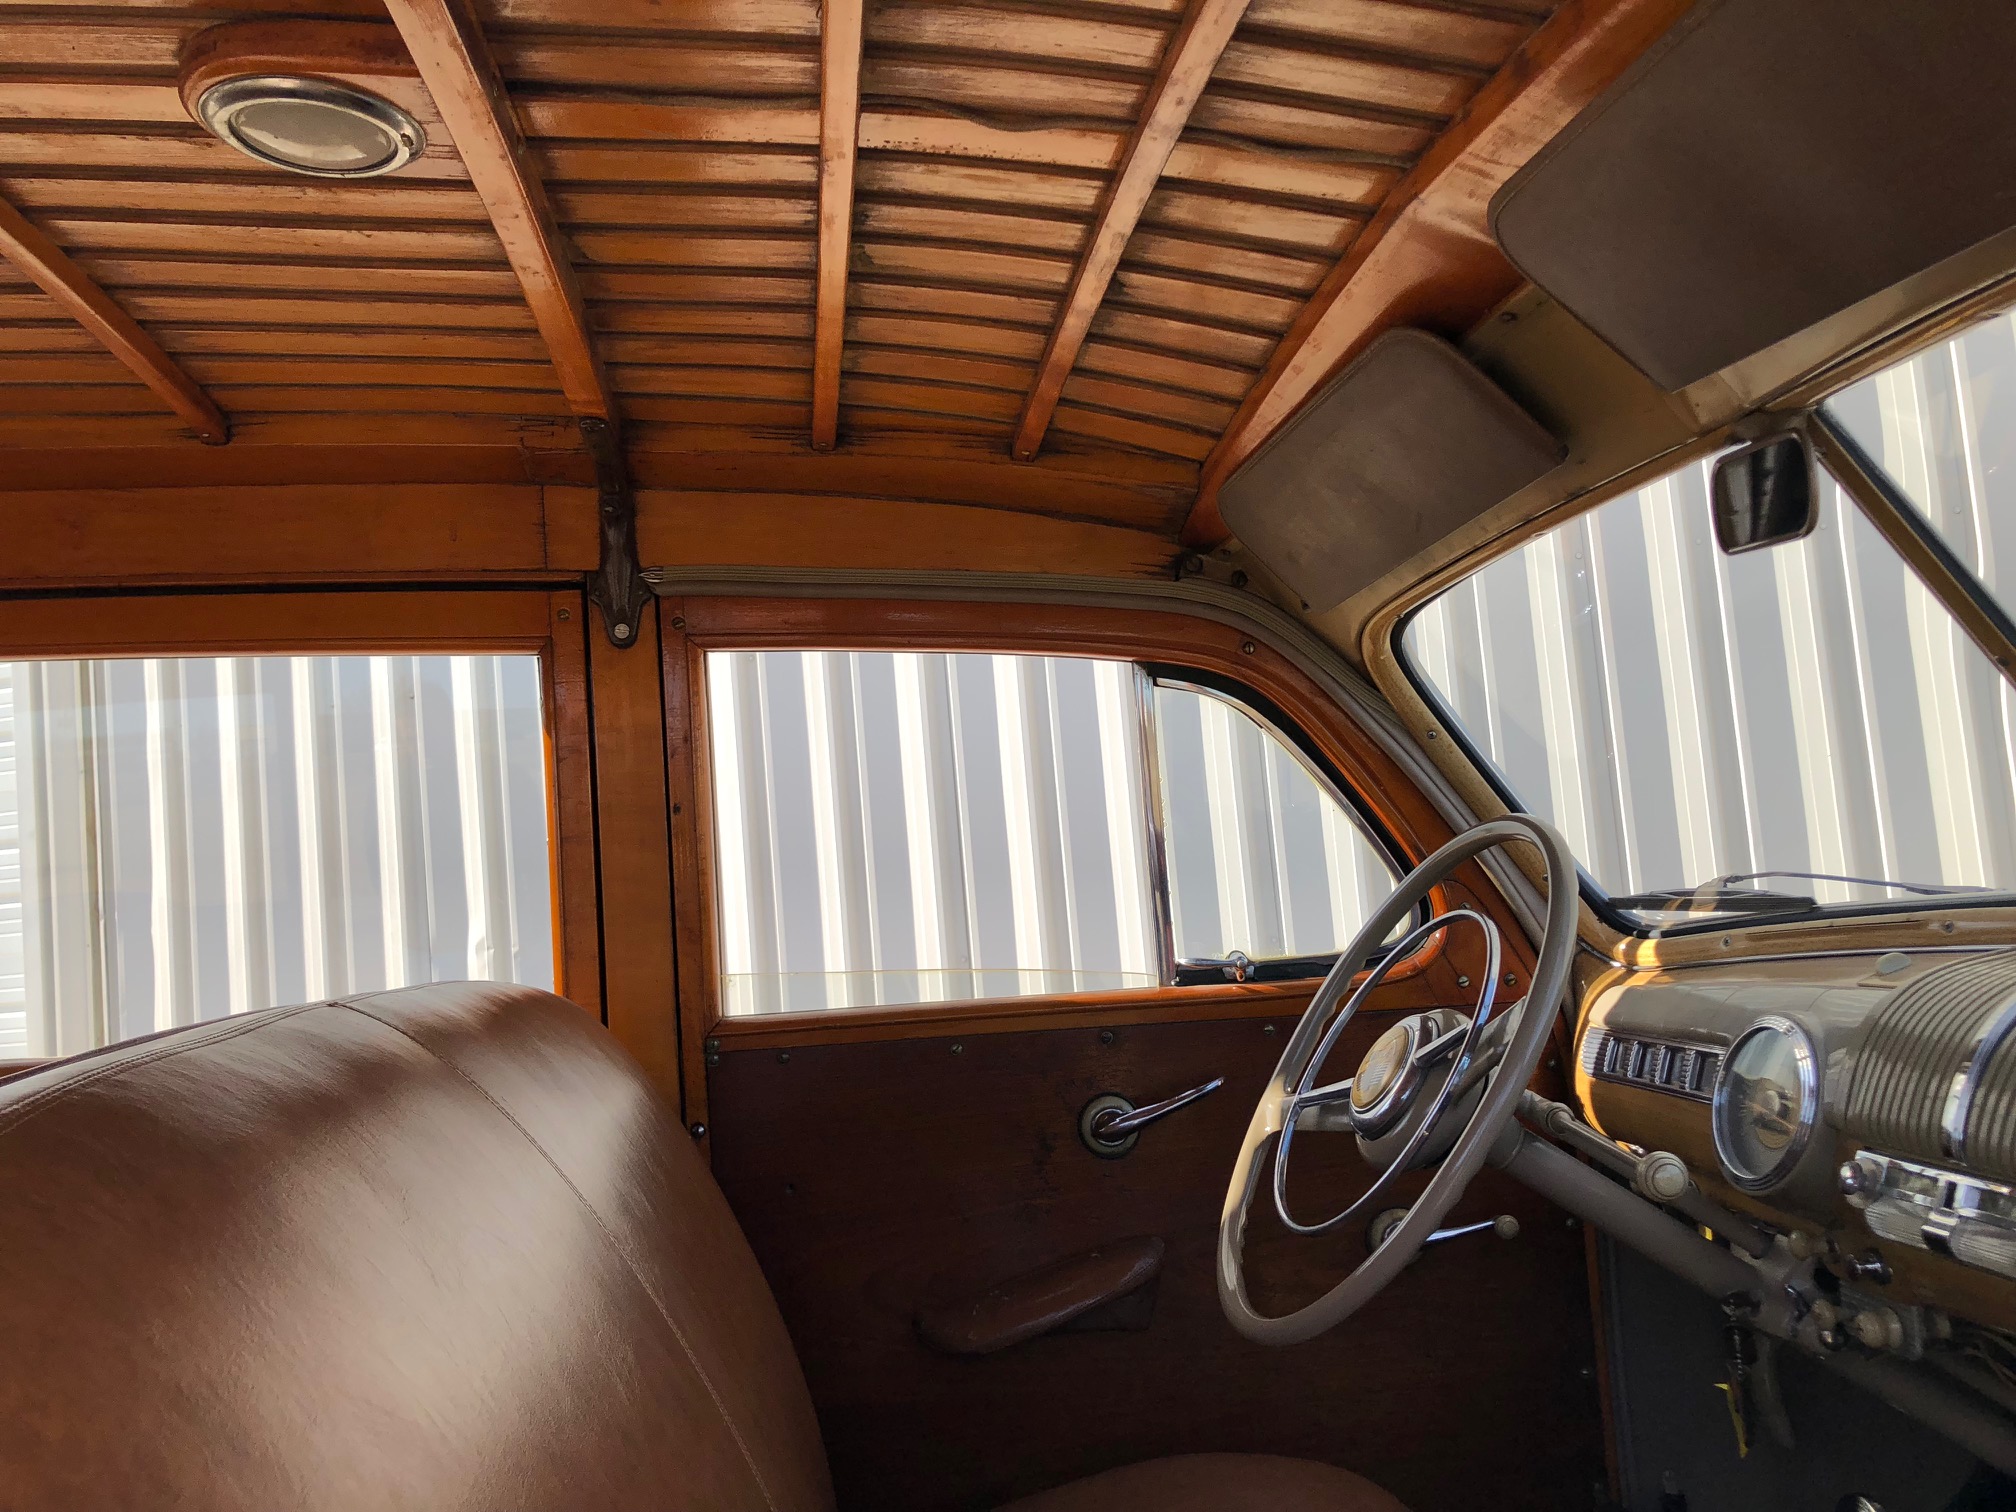 7th Image of a 1947 FORD SUPER DELUXE WOODY